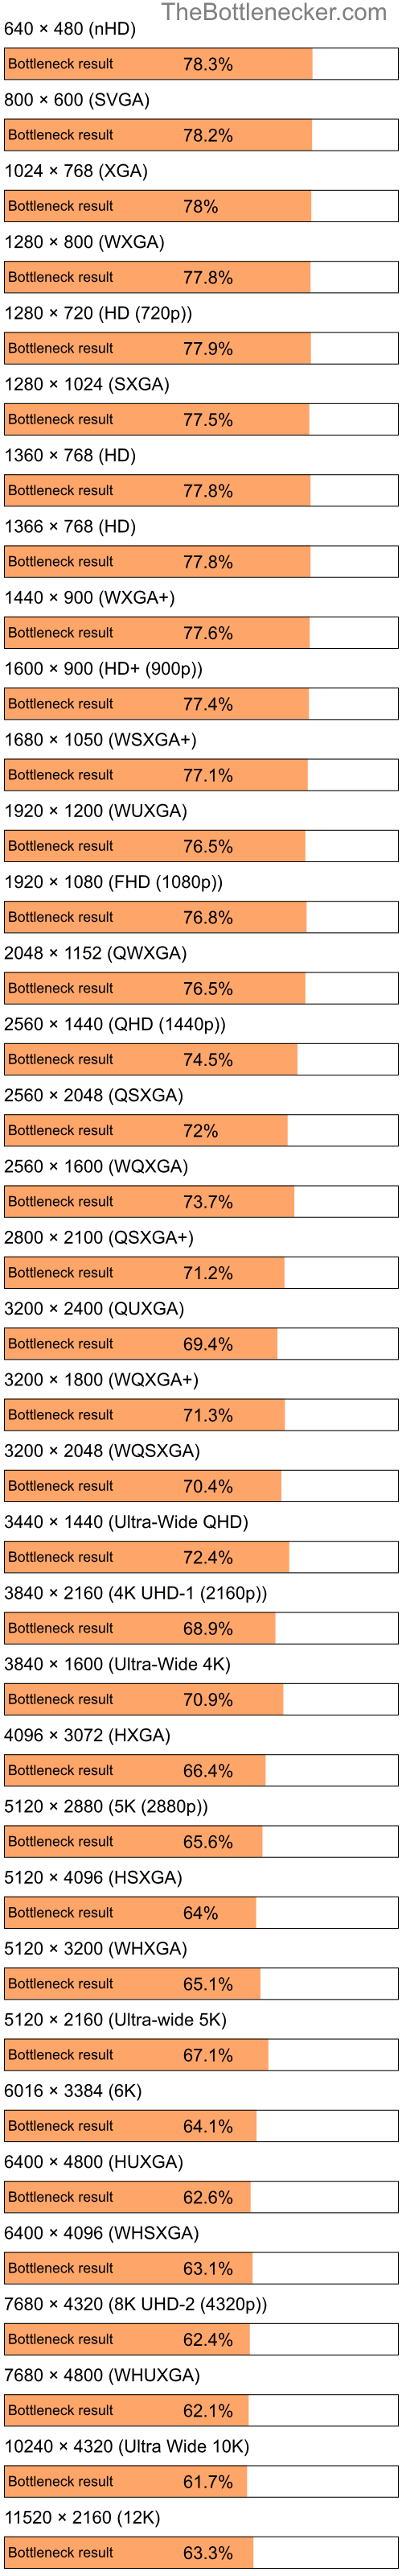 Bottleneck results by resolution for AMD Athlon XP 2000+ and NVIDIA GeForce RTX 3050 in Graphic Card Intense Tasks